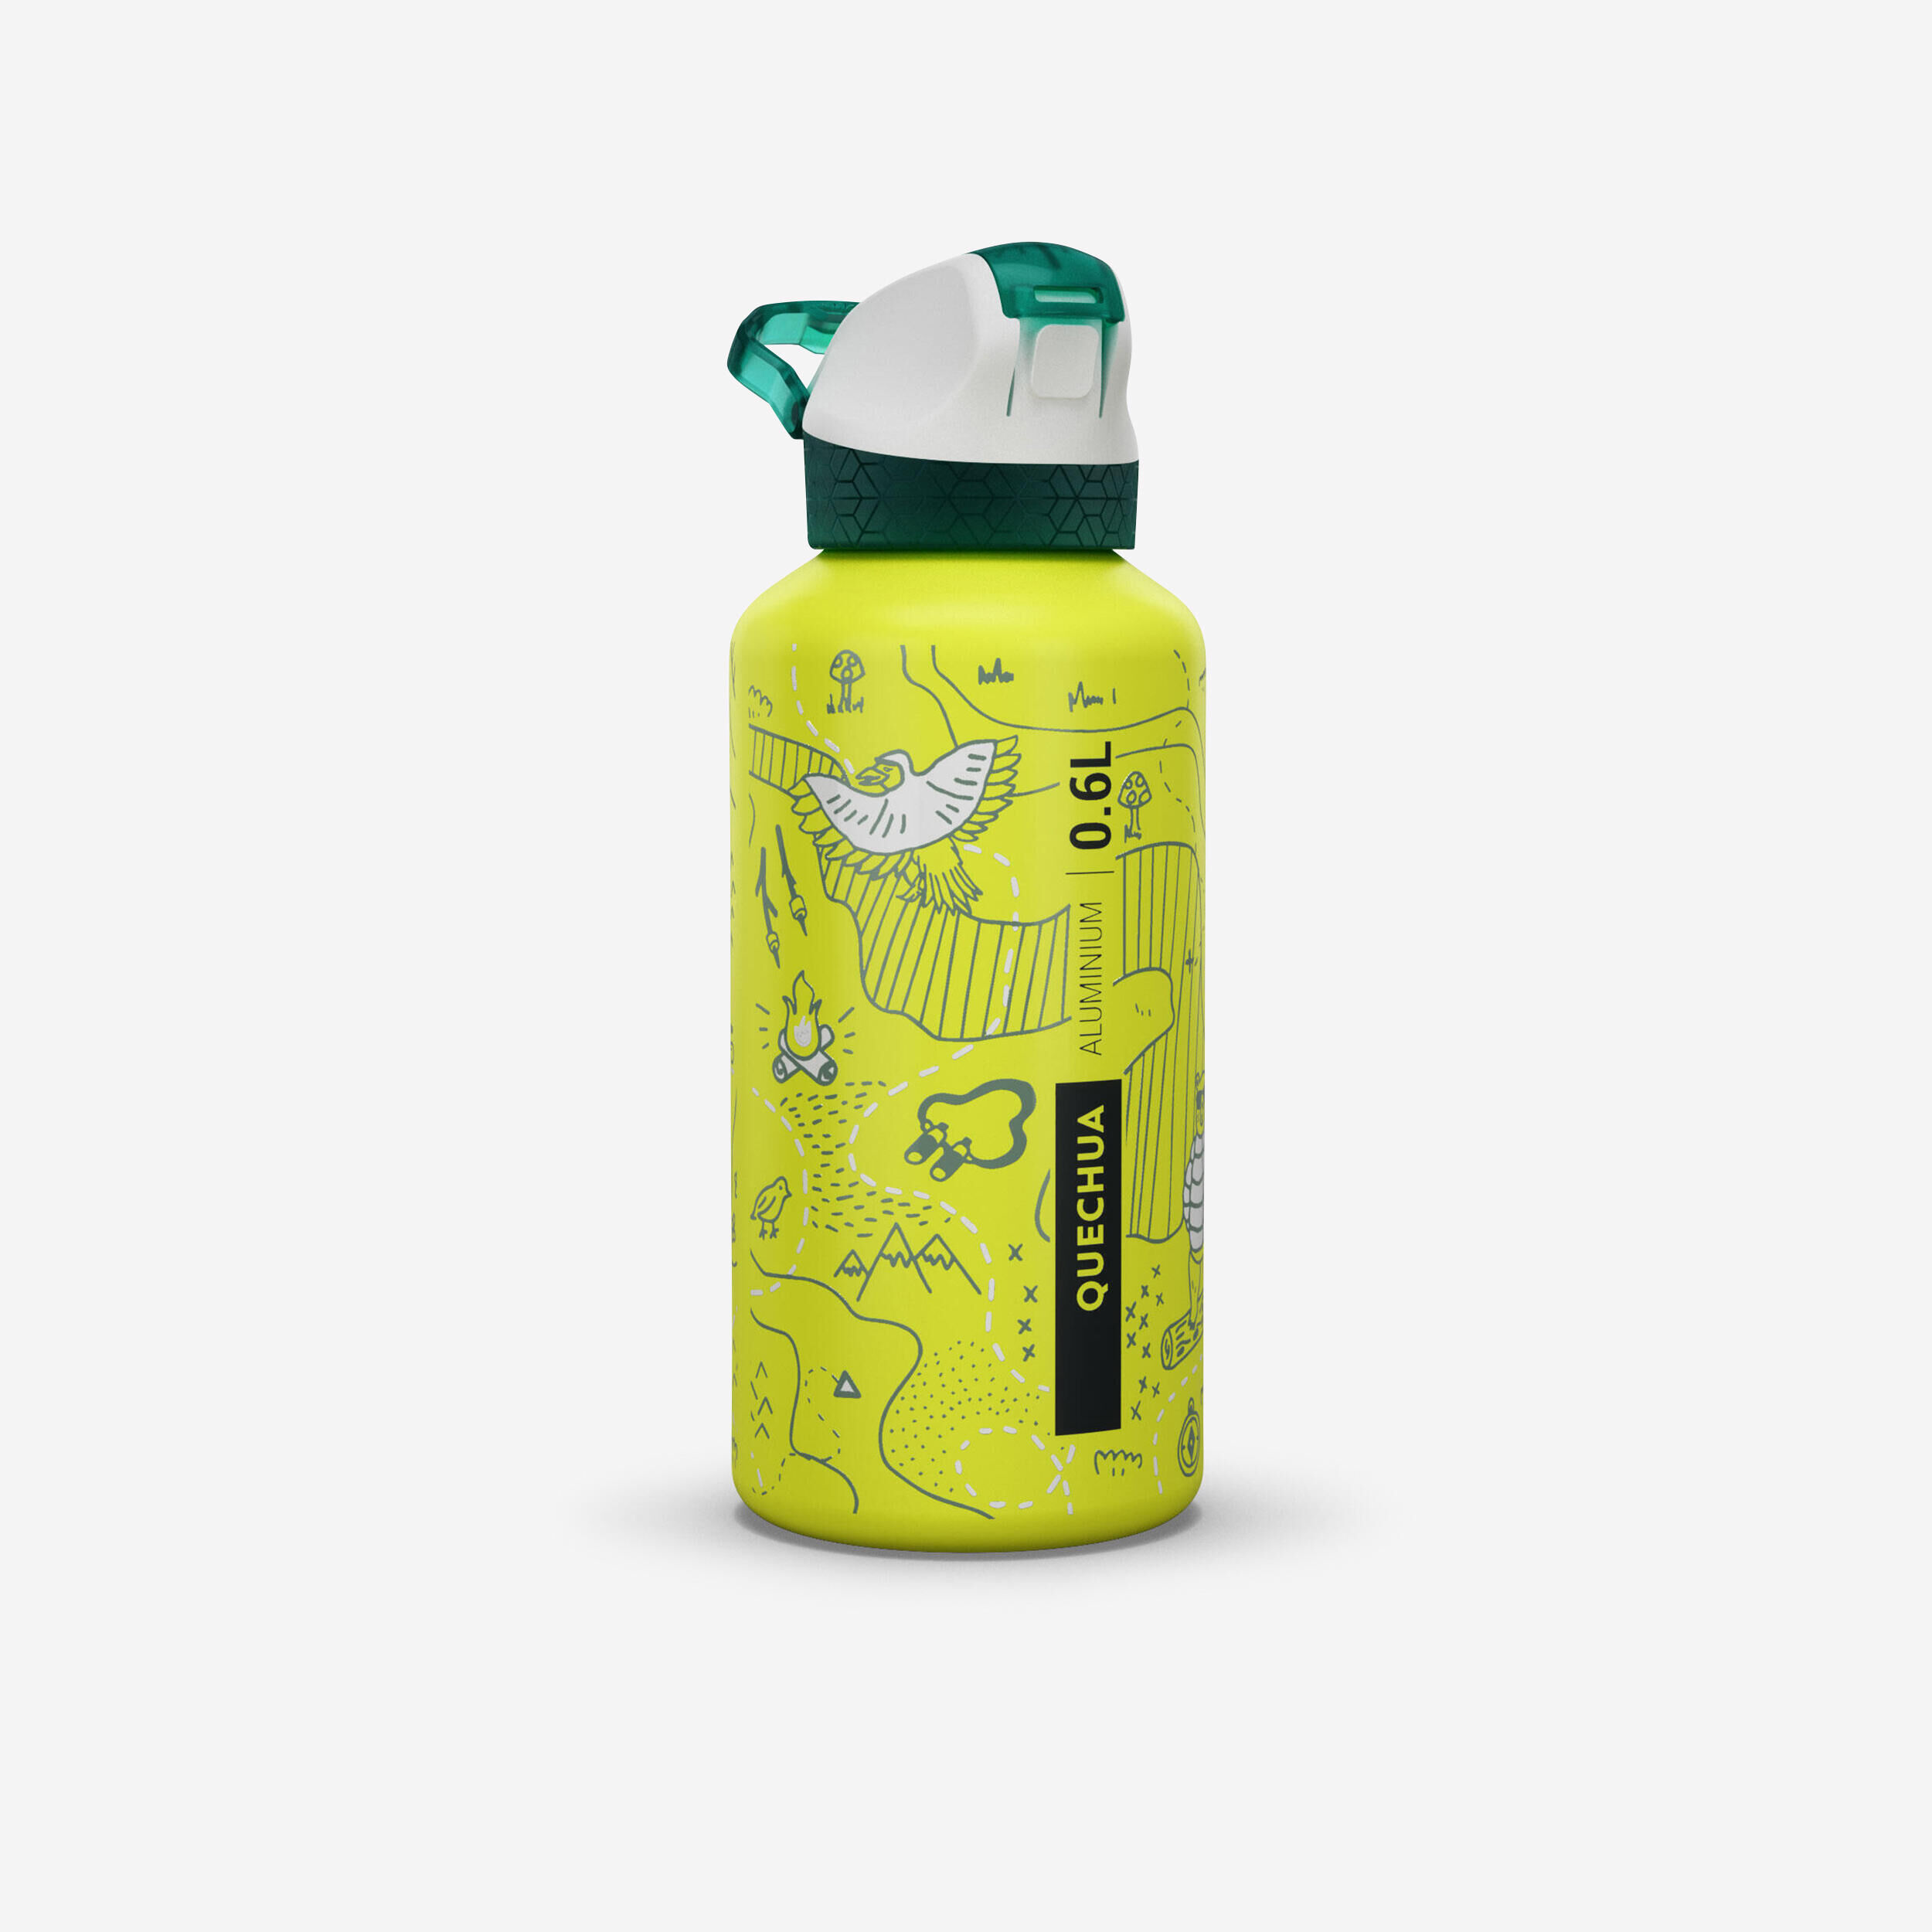 QUECHUA 0.6 L aluminium flask with instant cap and pipette for hiking